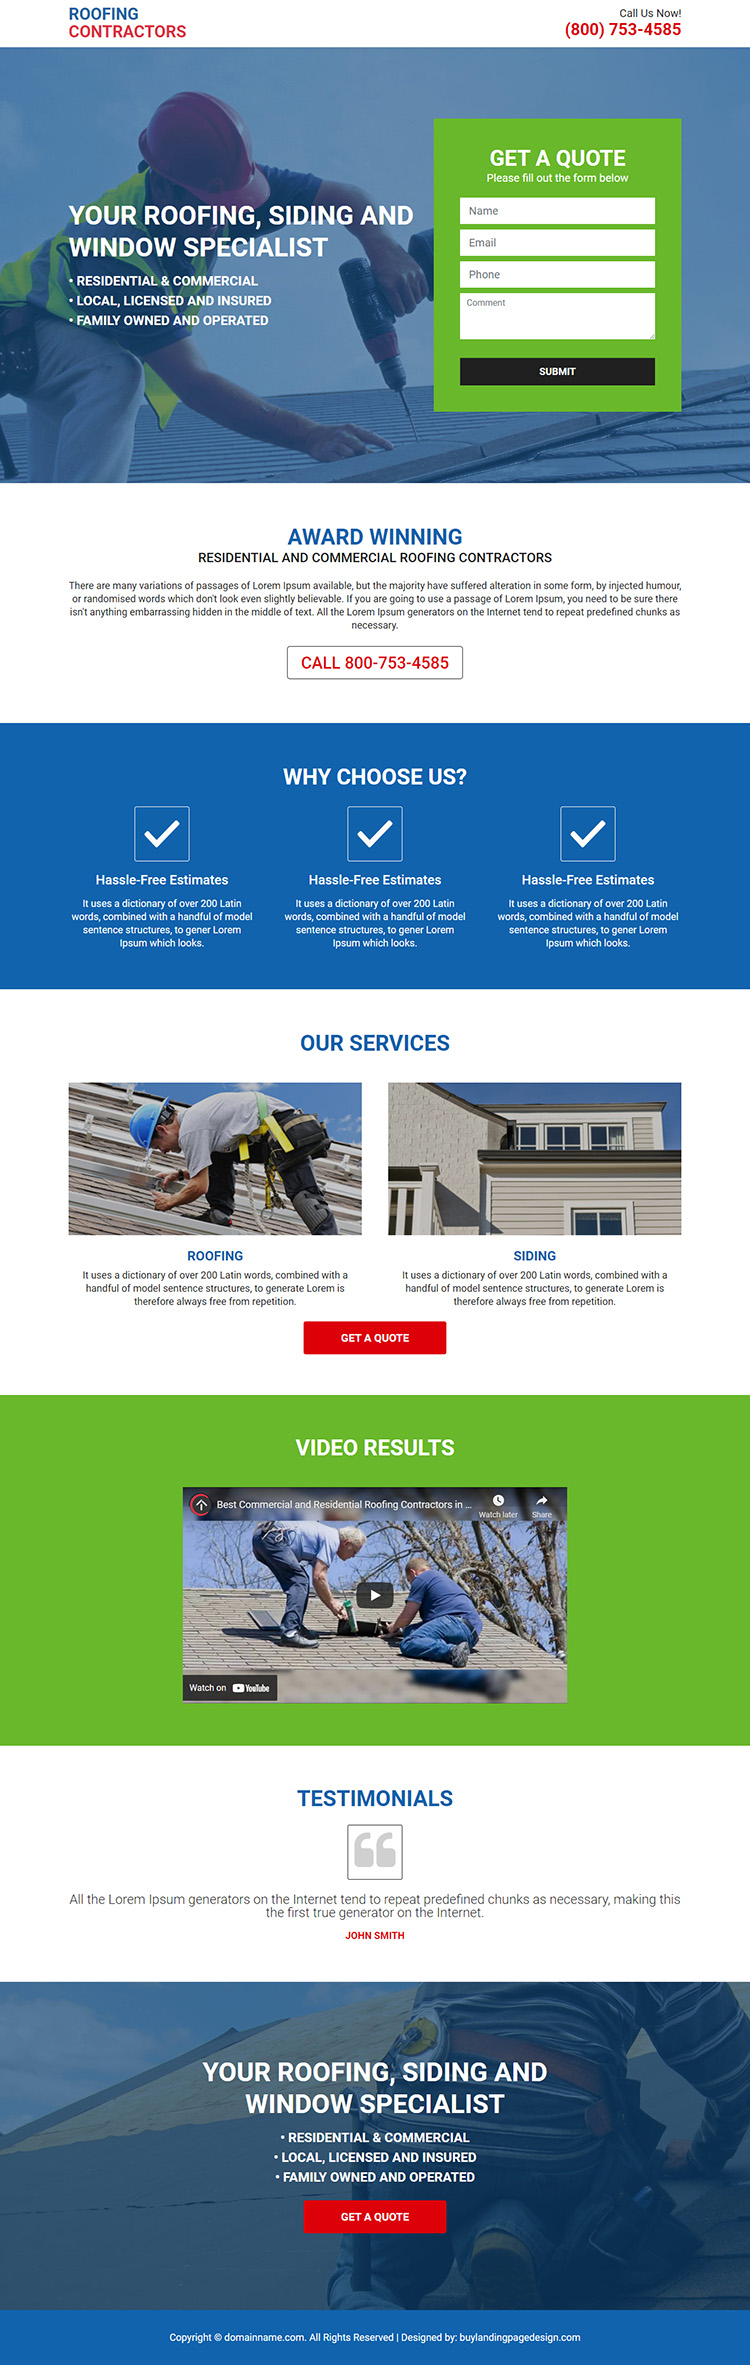 residential and commercial roofing contractor landing page